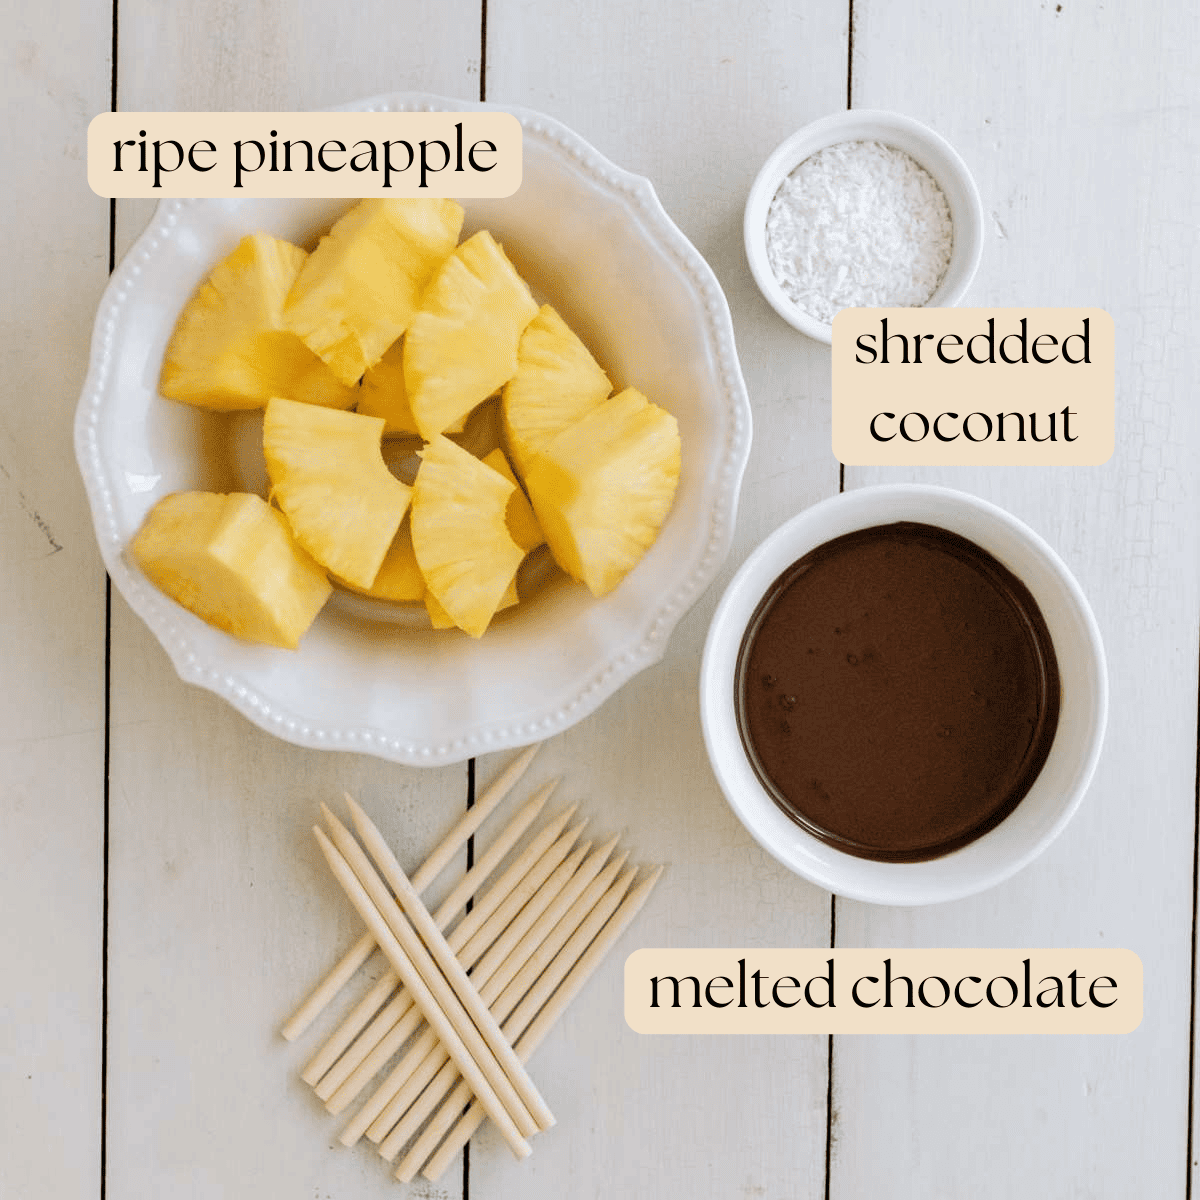 Ingredients for chocolate covered pineapple in bowls and laid out on a wooden board.